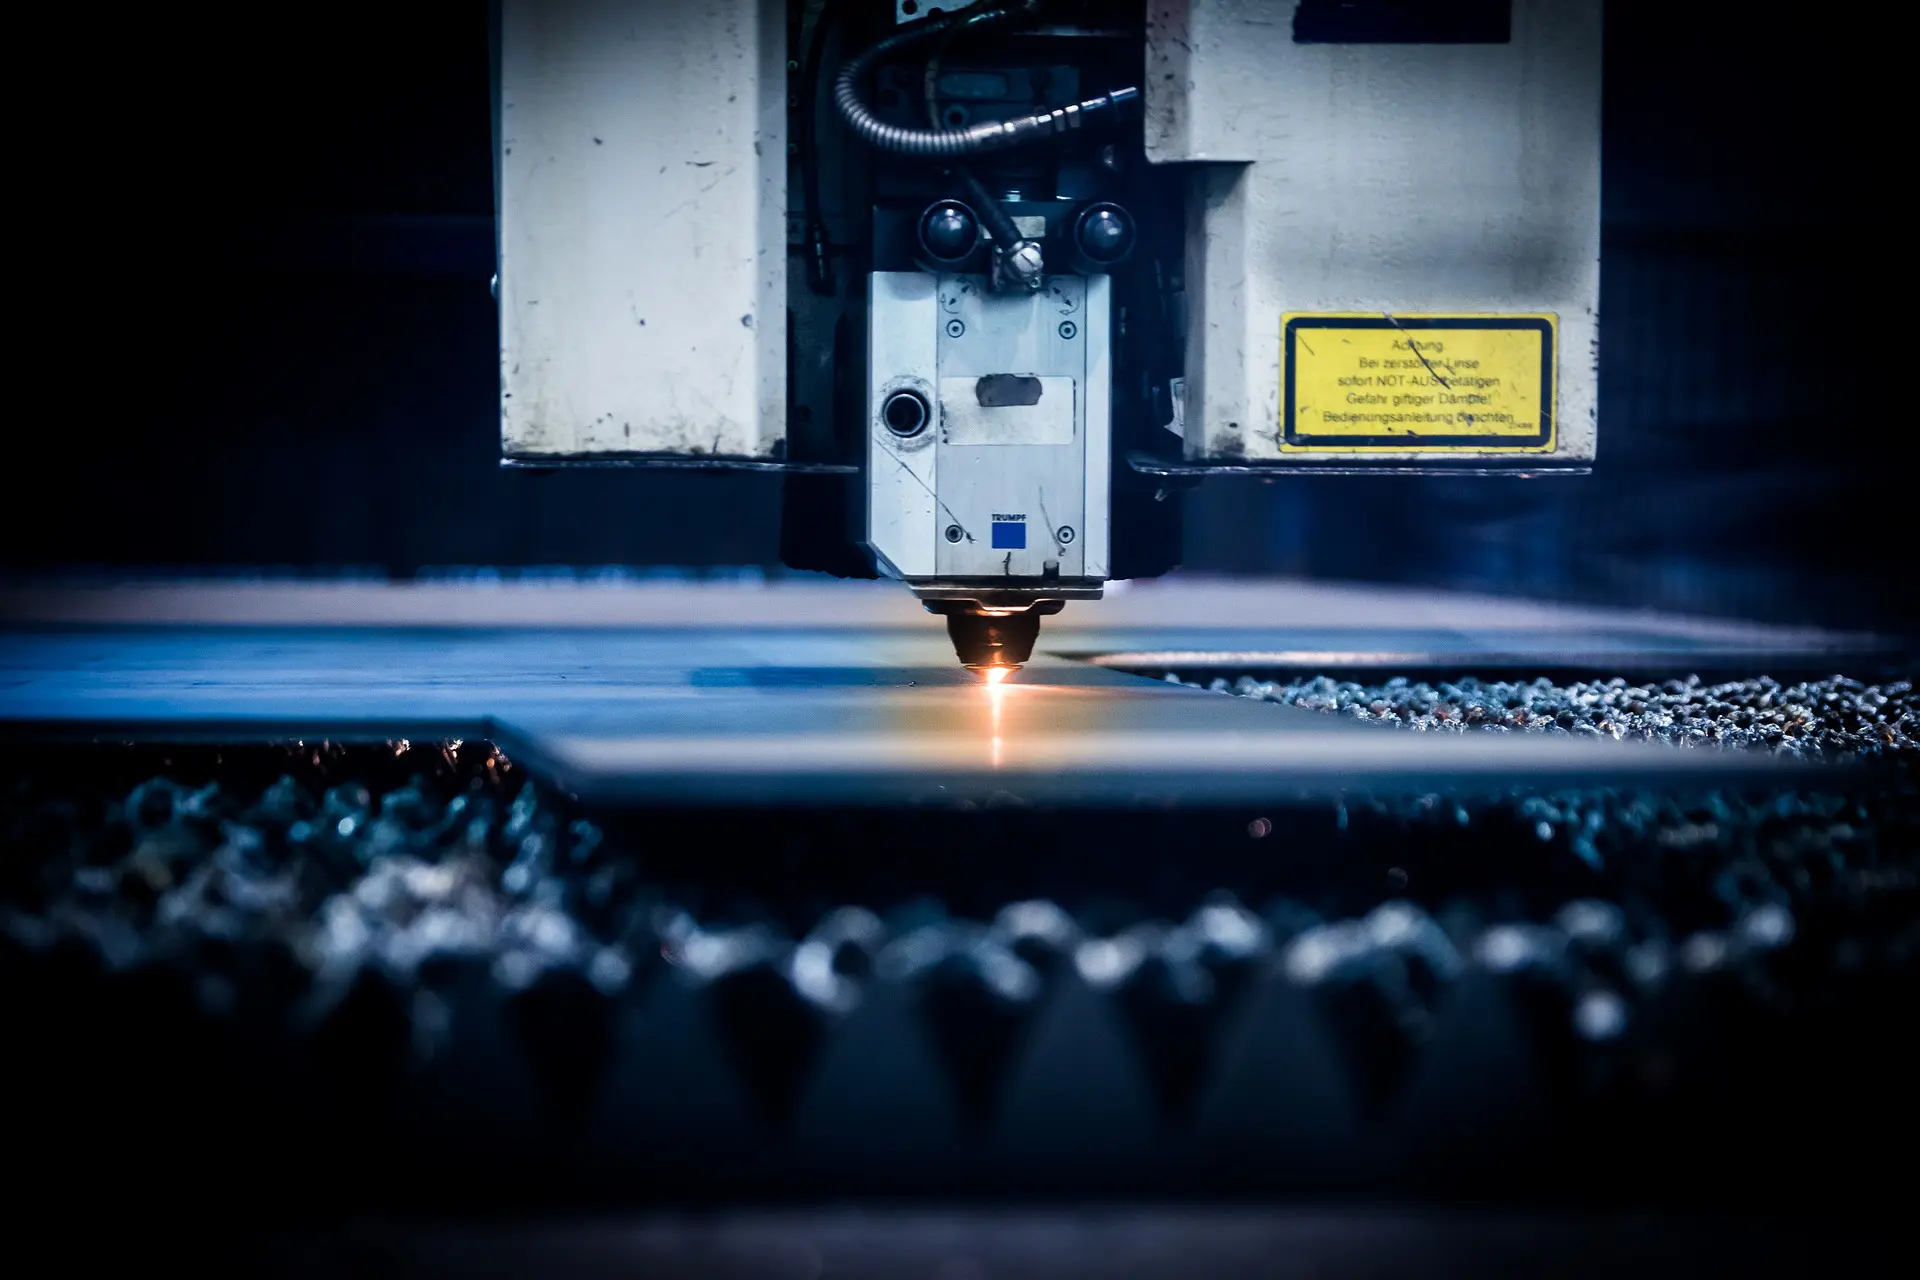 What materials are suitable for laser cutting?